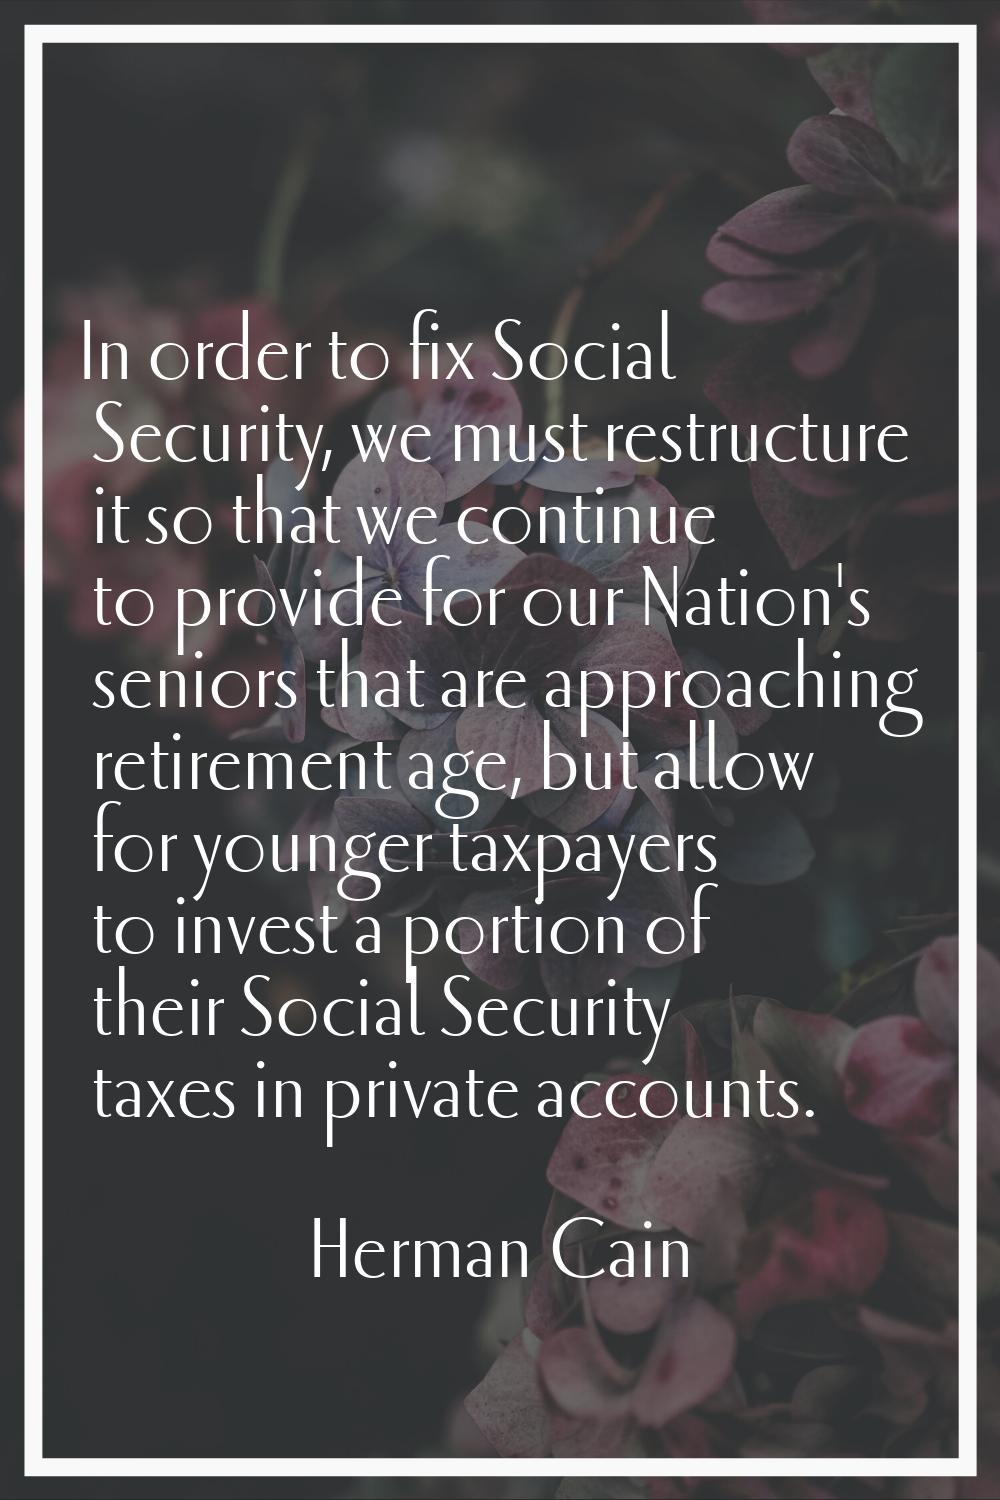 In order to fix Social Security, we must restructure it so that we continue to provide for our Nati